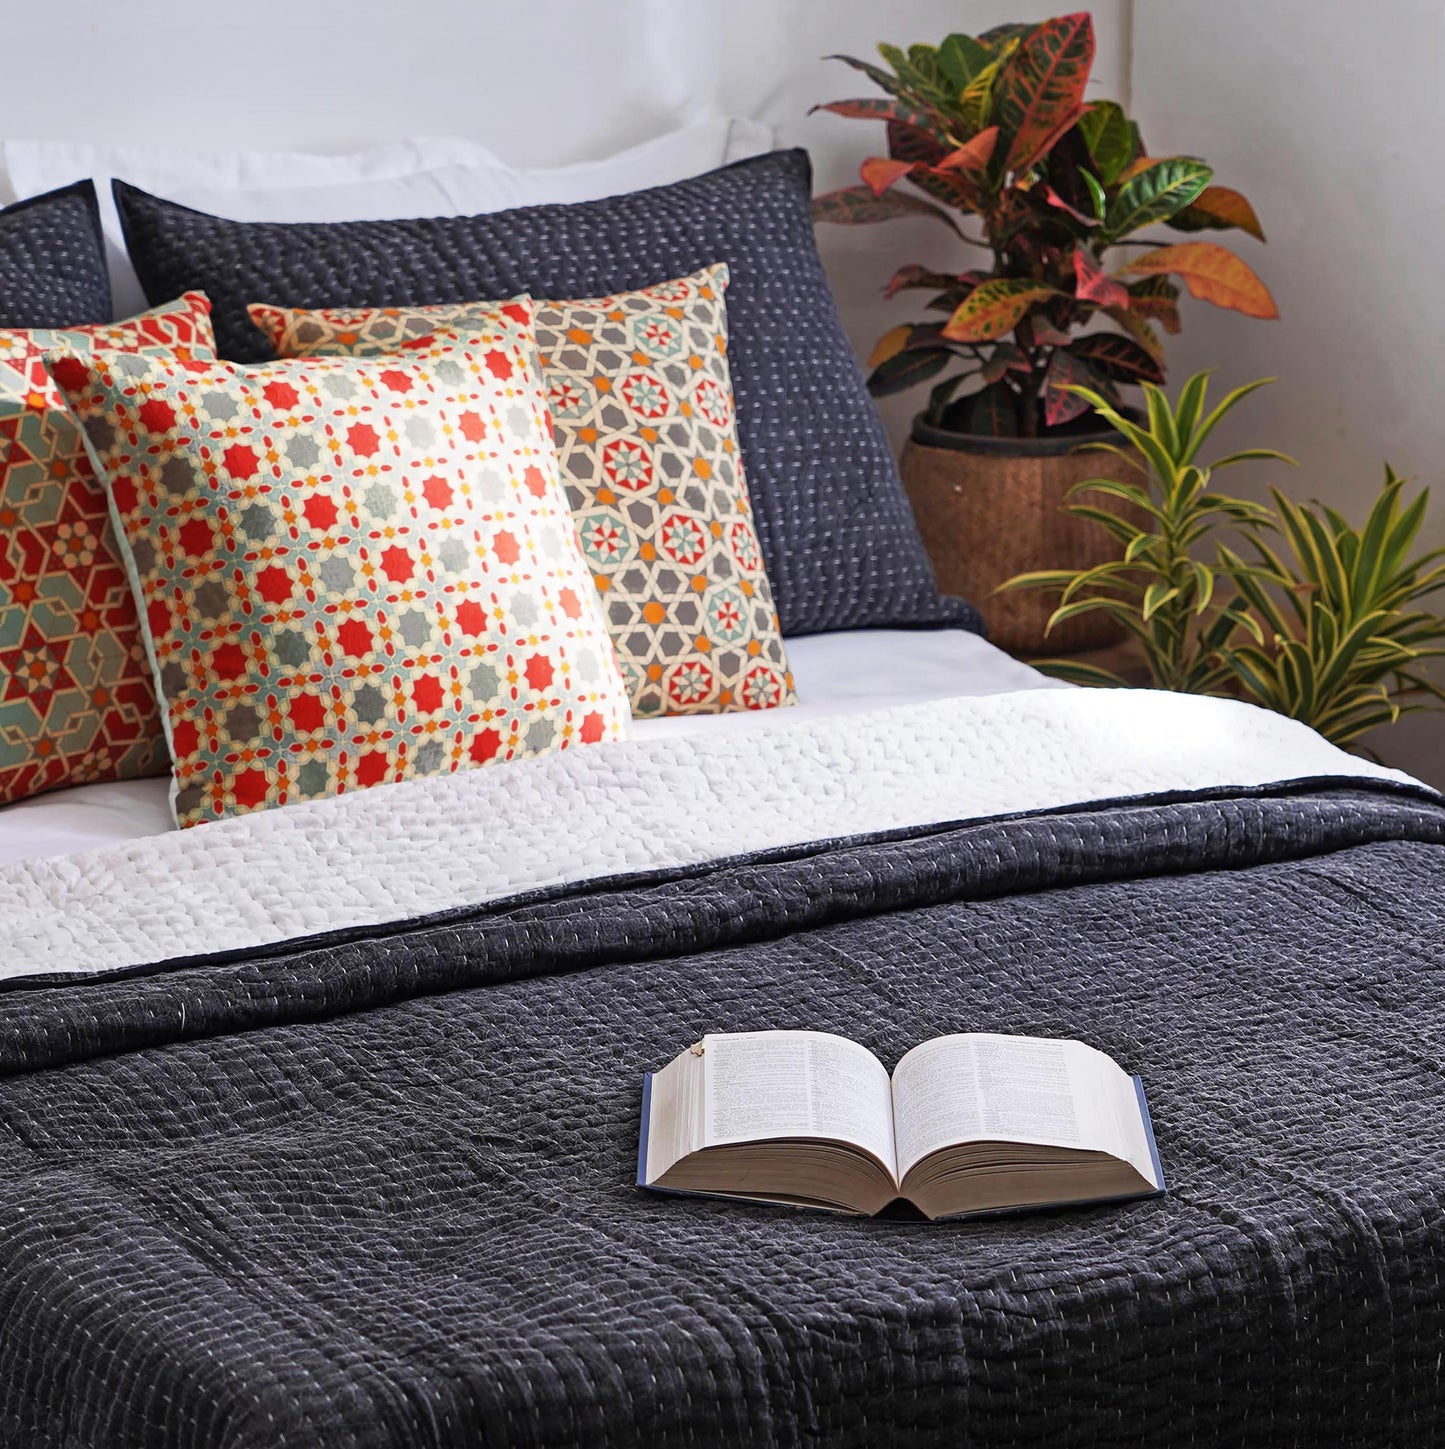 Charcoal grey colour stonewashed kantha quilted pillow shams - 100% cotton, Sizes available